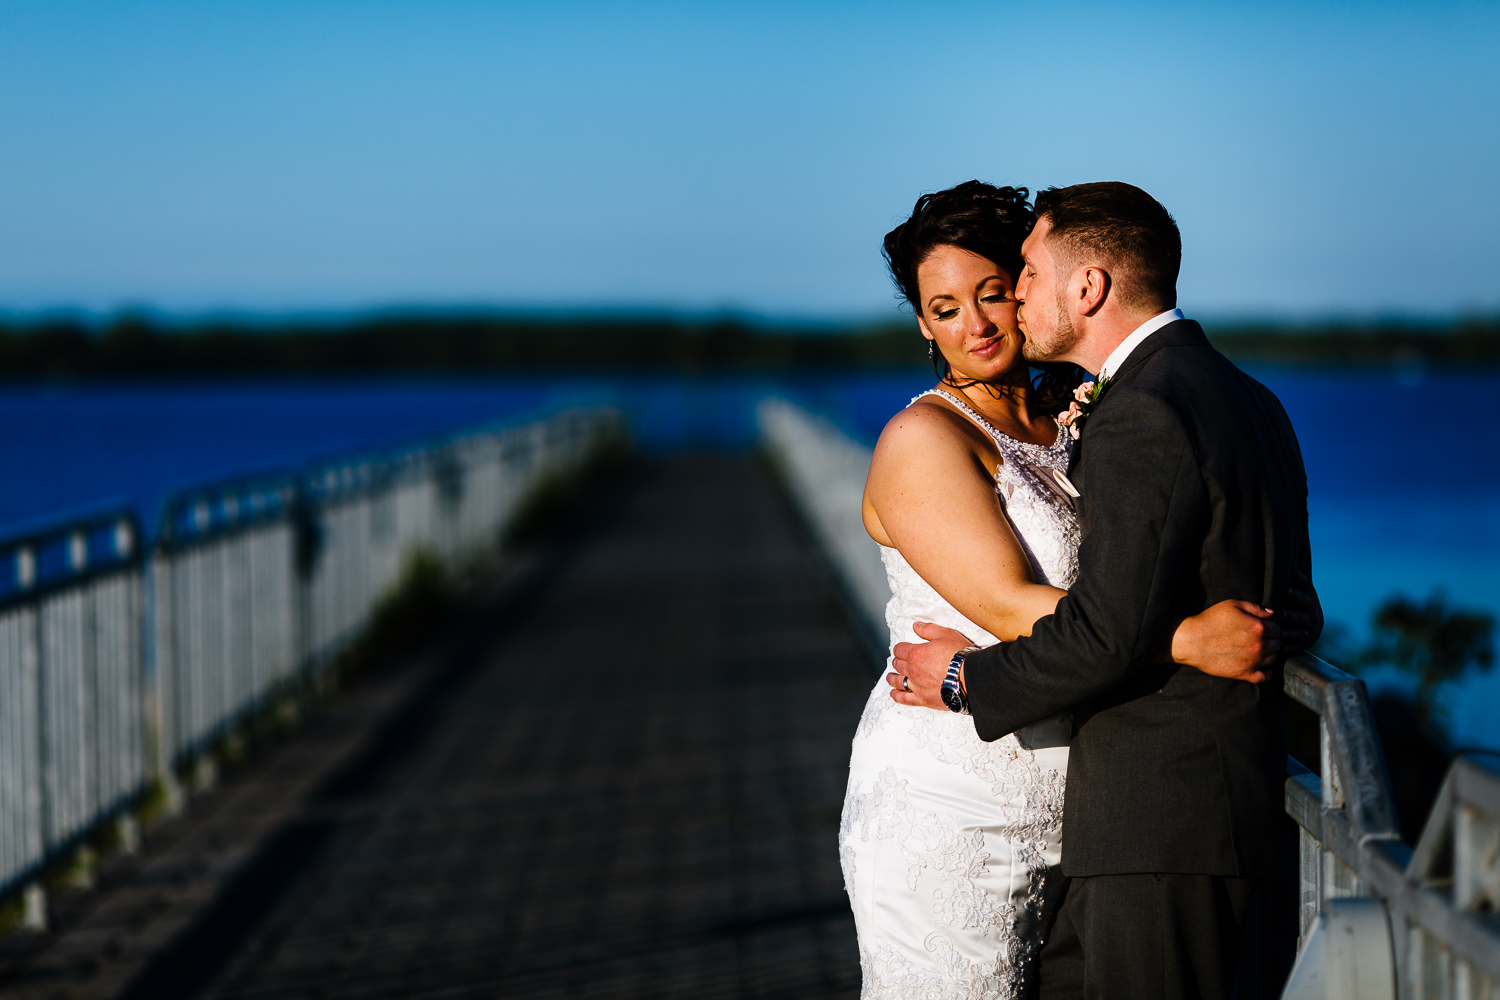  Groom kisses his bride on a pier at sunset. A blue lake is in the background. 